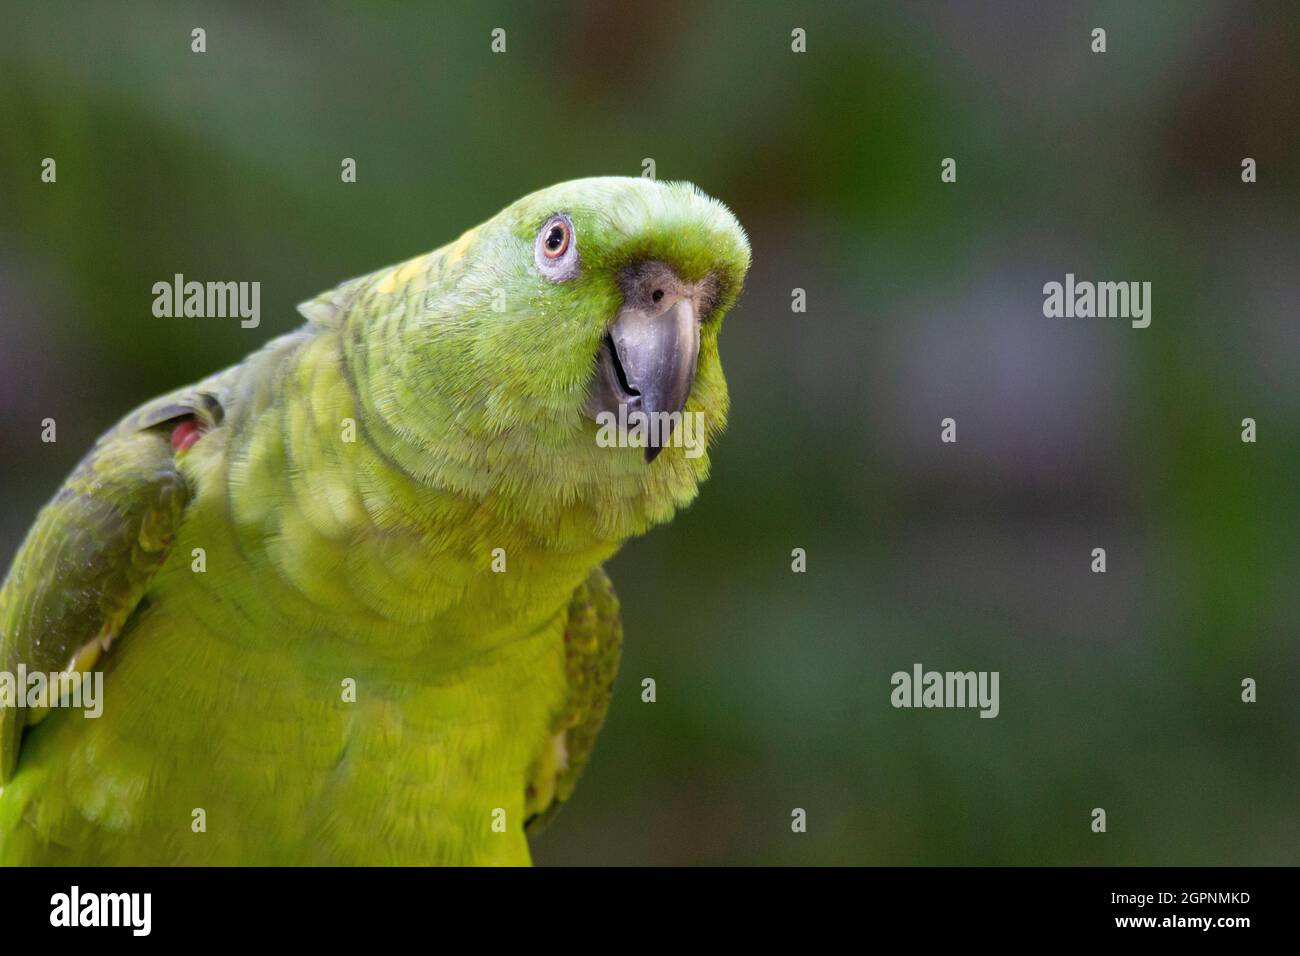 Mealy parrot portrait, Amazona farinosa. Large, bright green parrot of humid evergreen forest in tropical lowlands. Uncommon Stock Photo